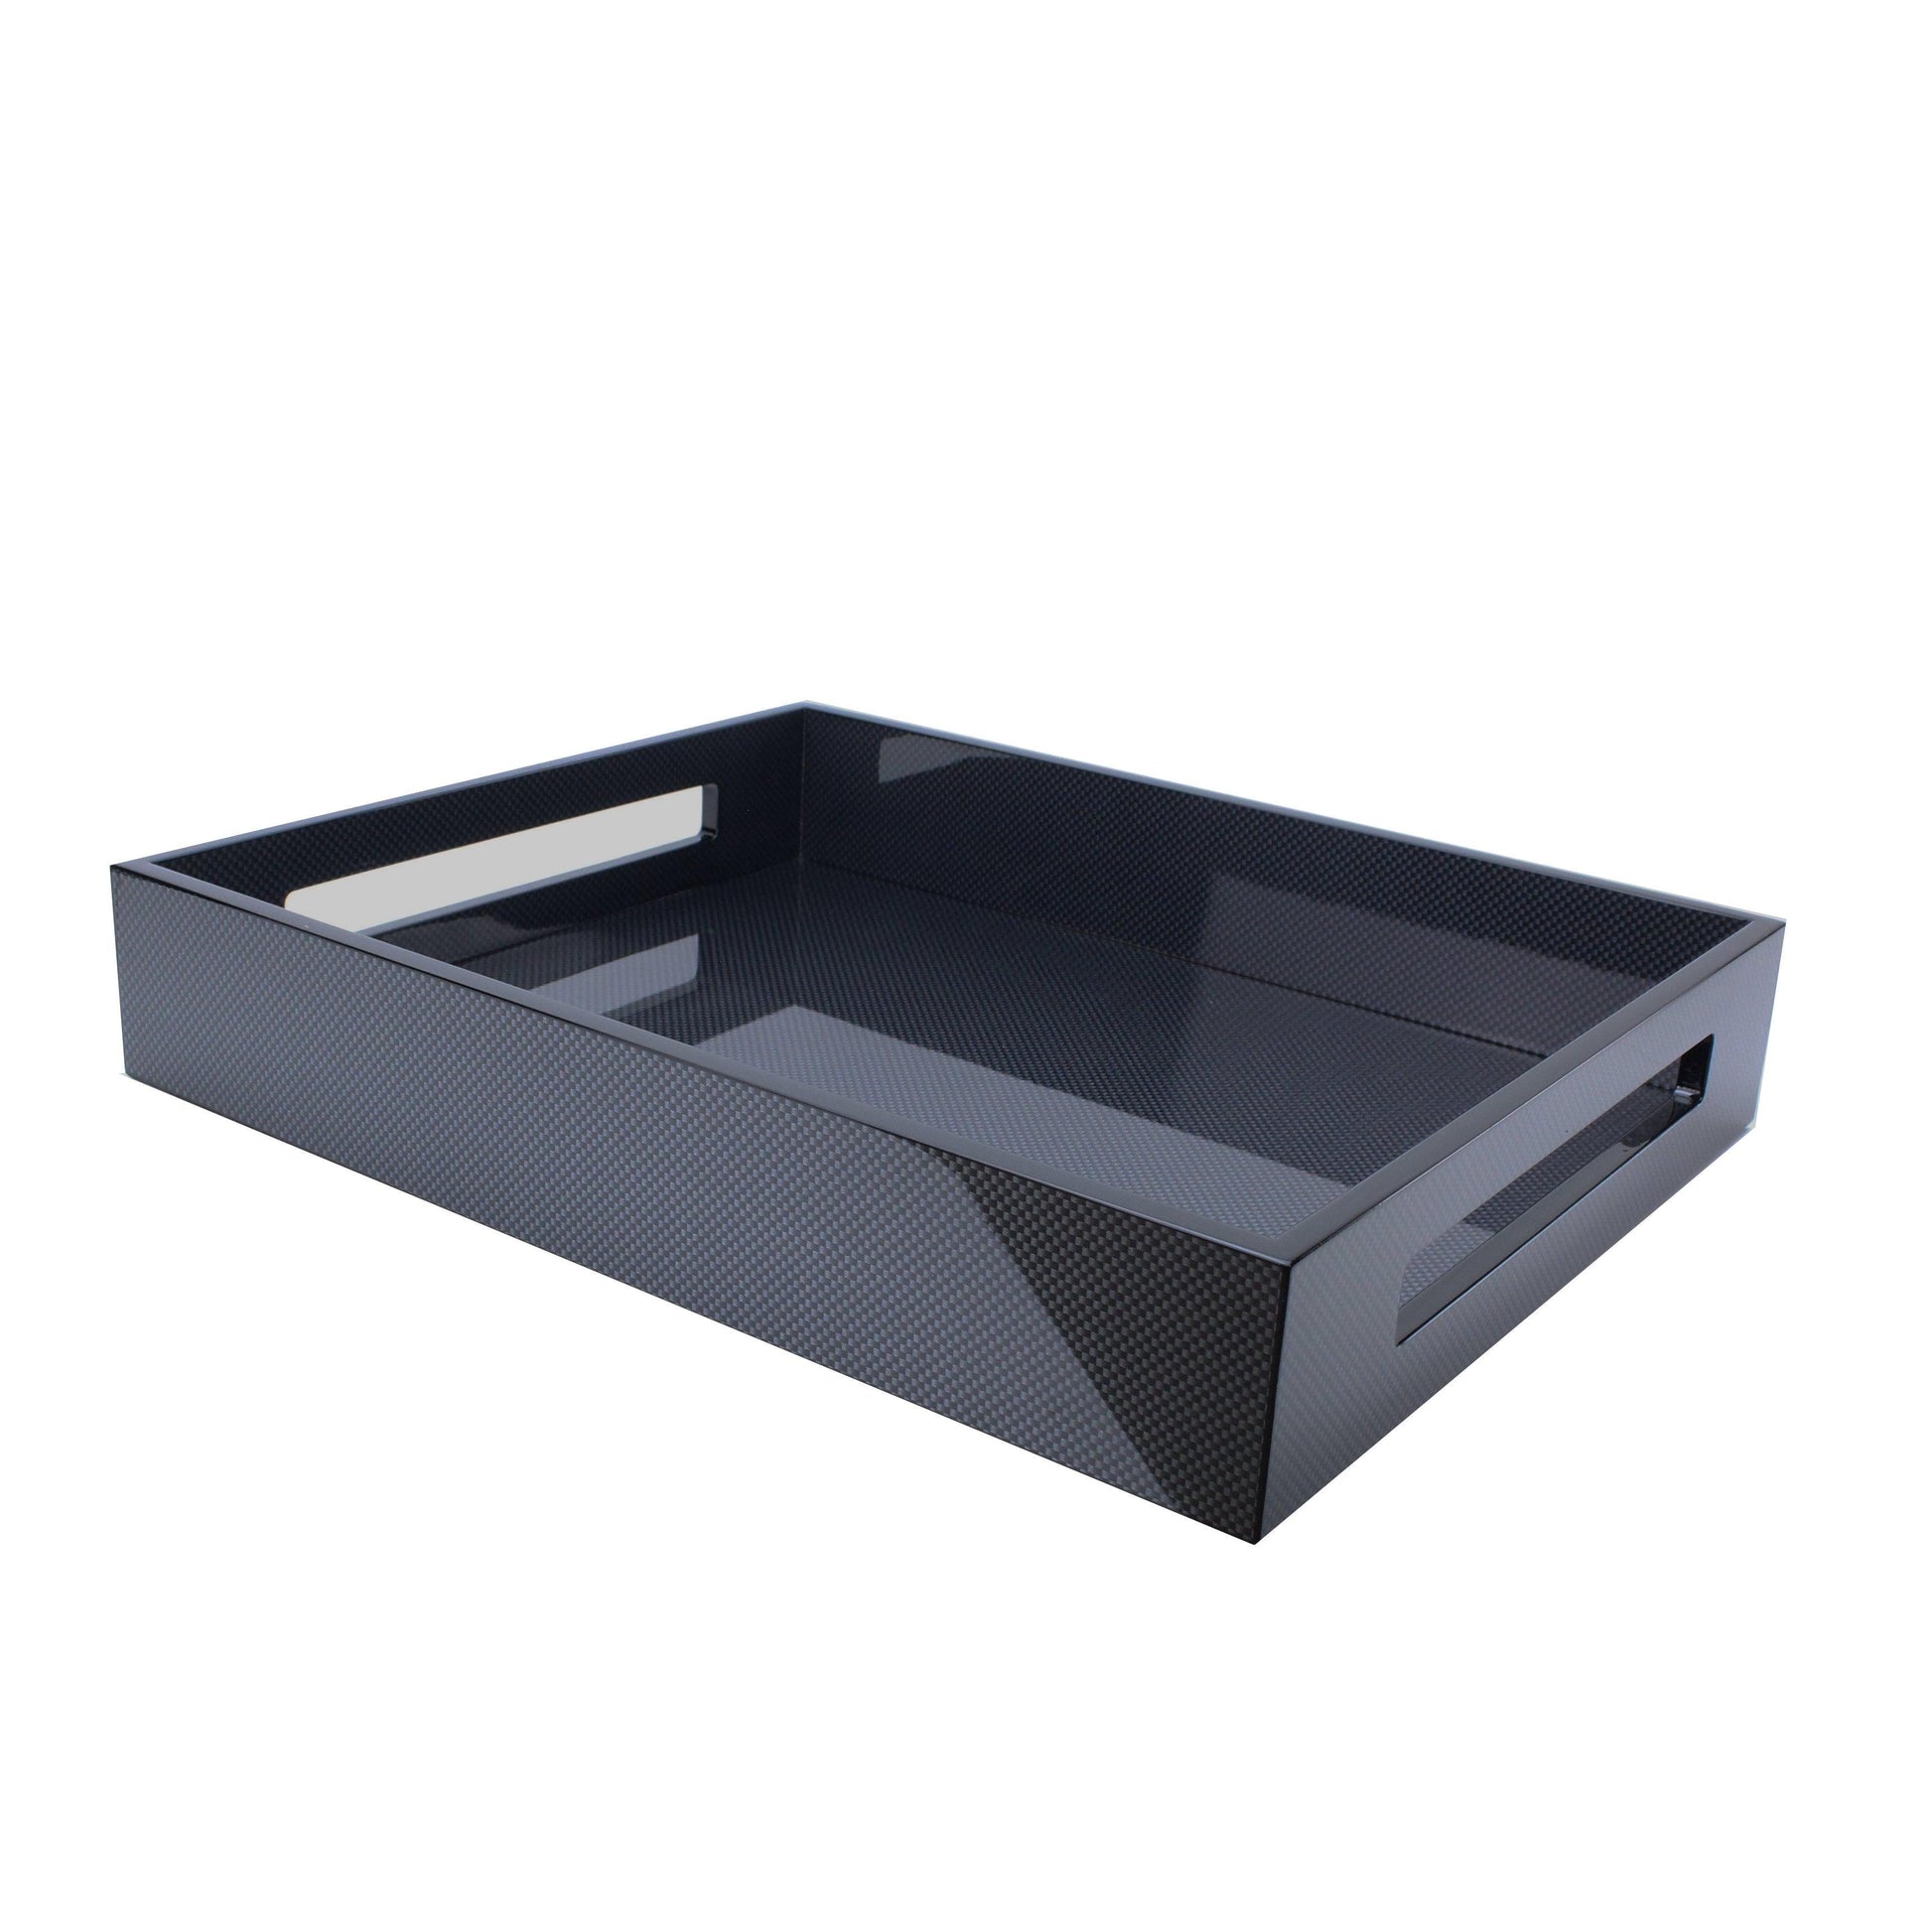 Addison Ross 16x14 Lacquered Tray by Addison Ross